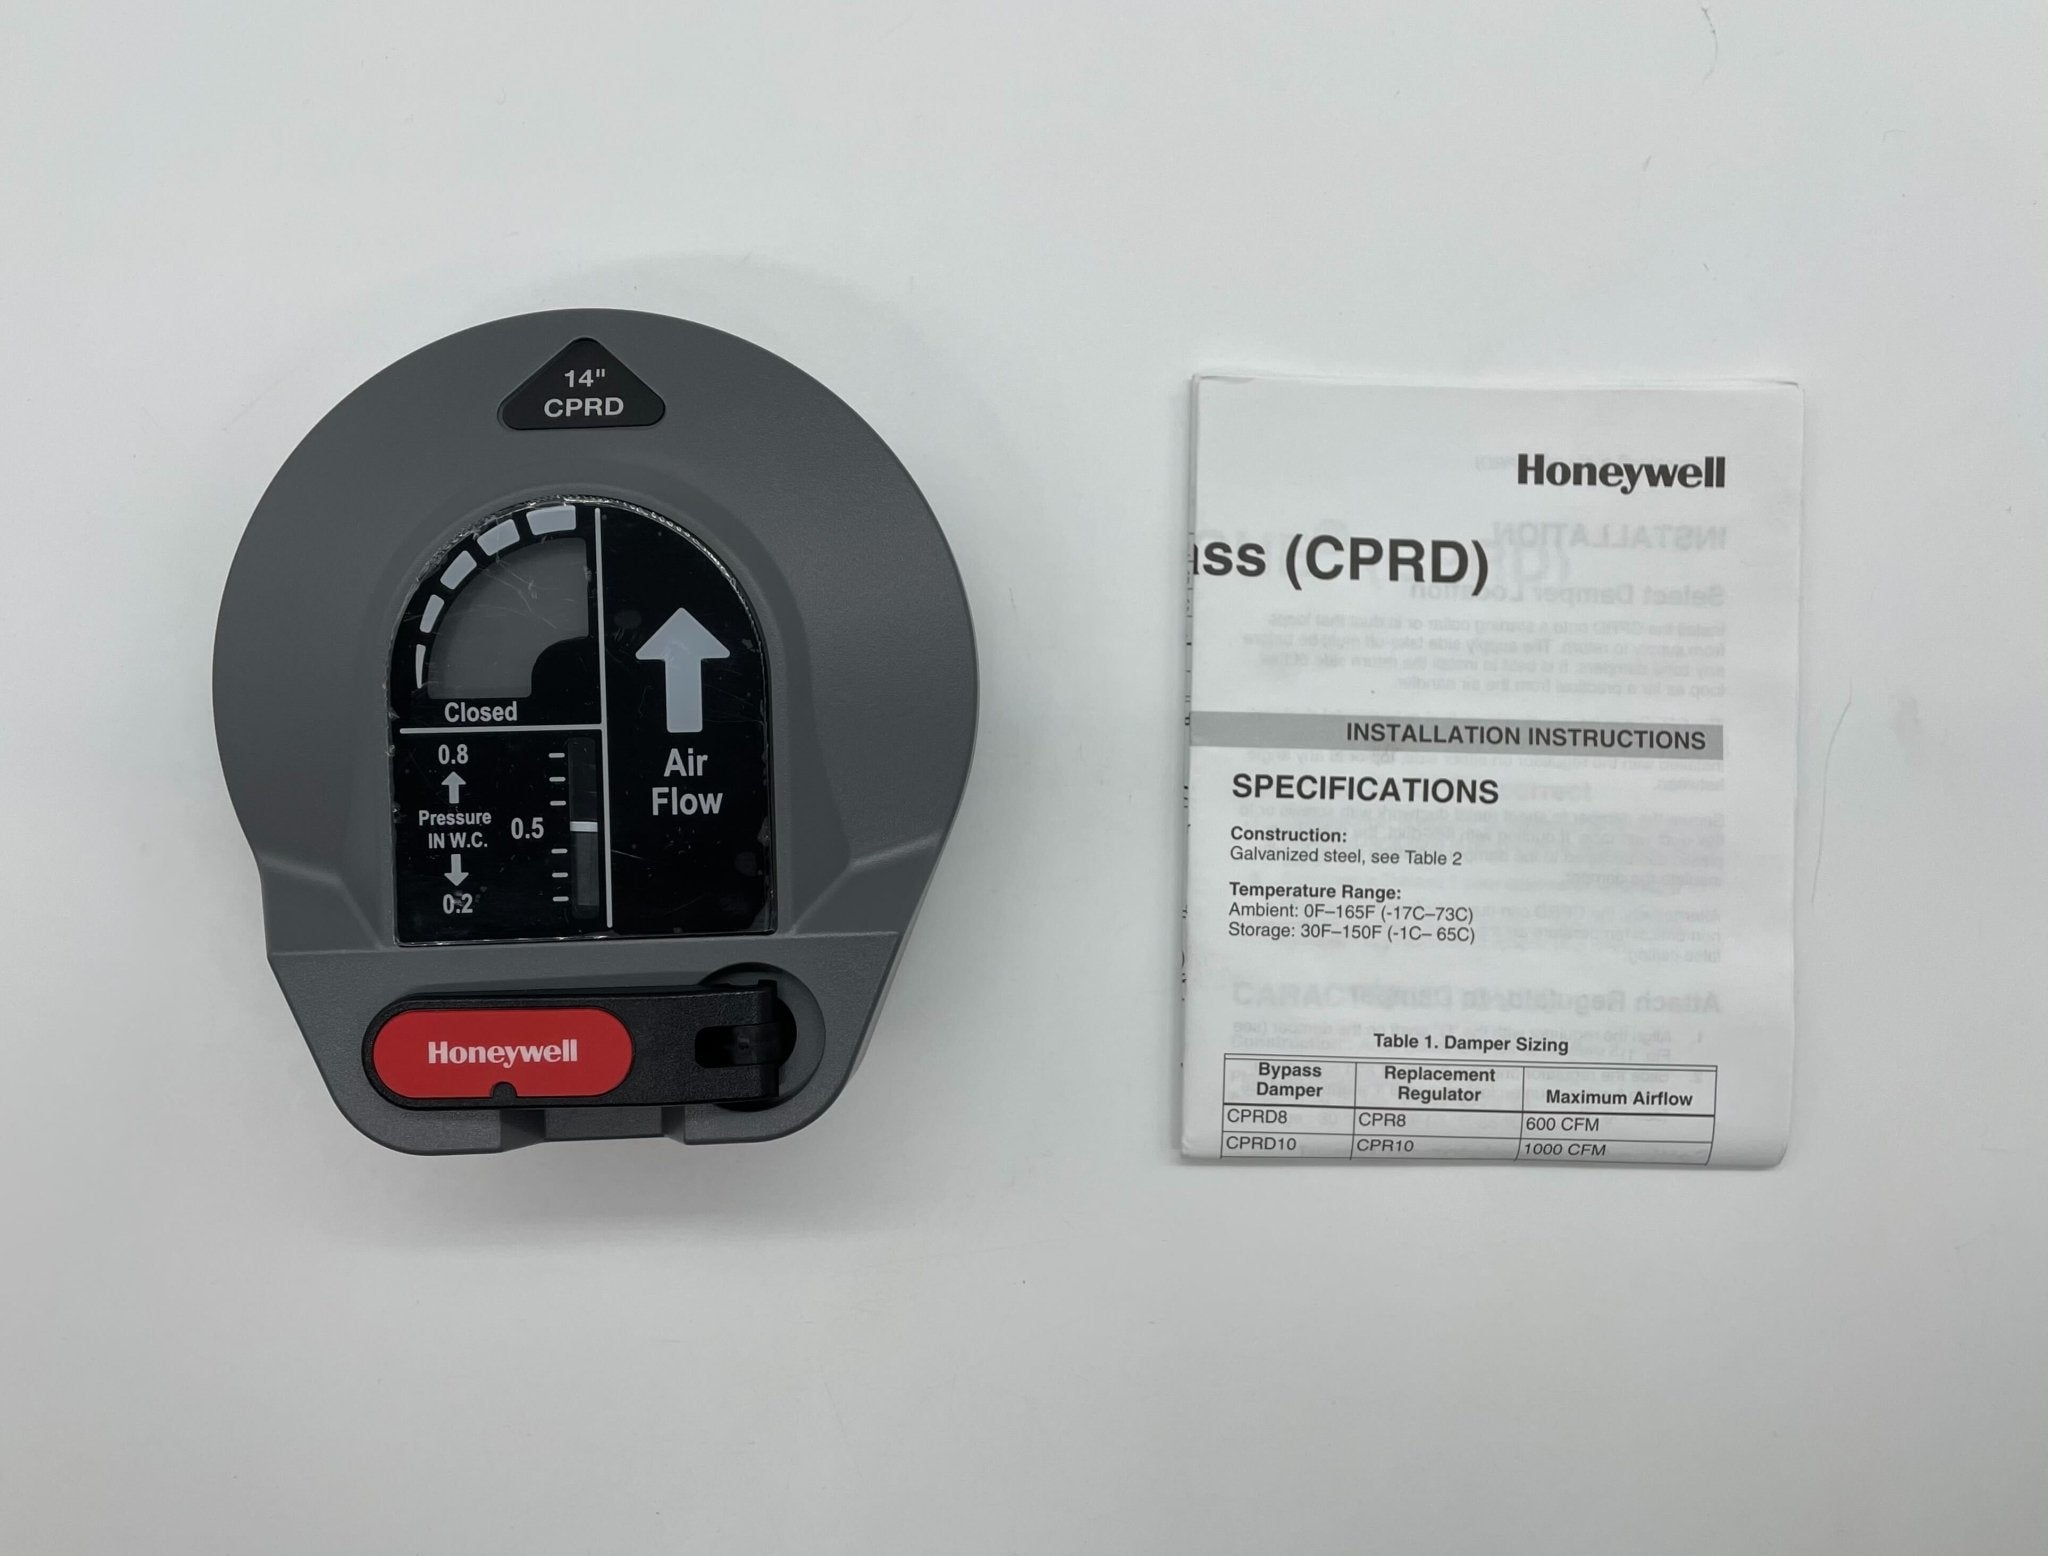 Honeywell CPR14 - The Fire Alarm Supplier